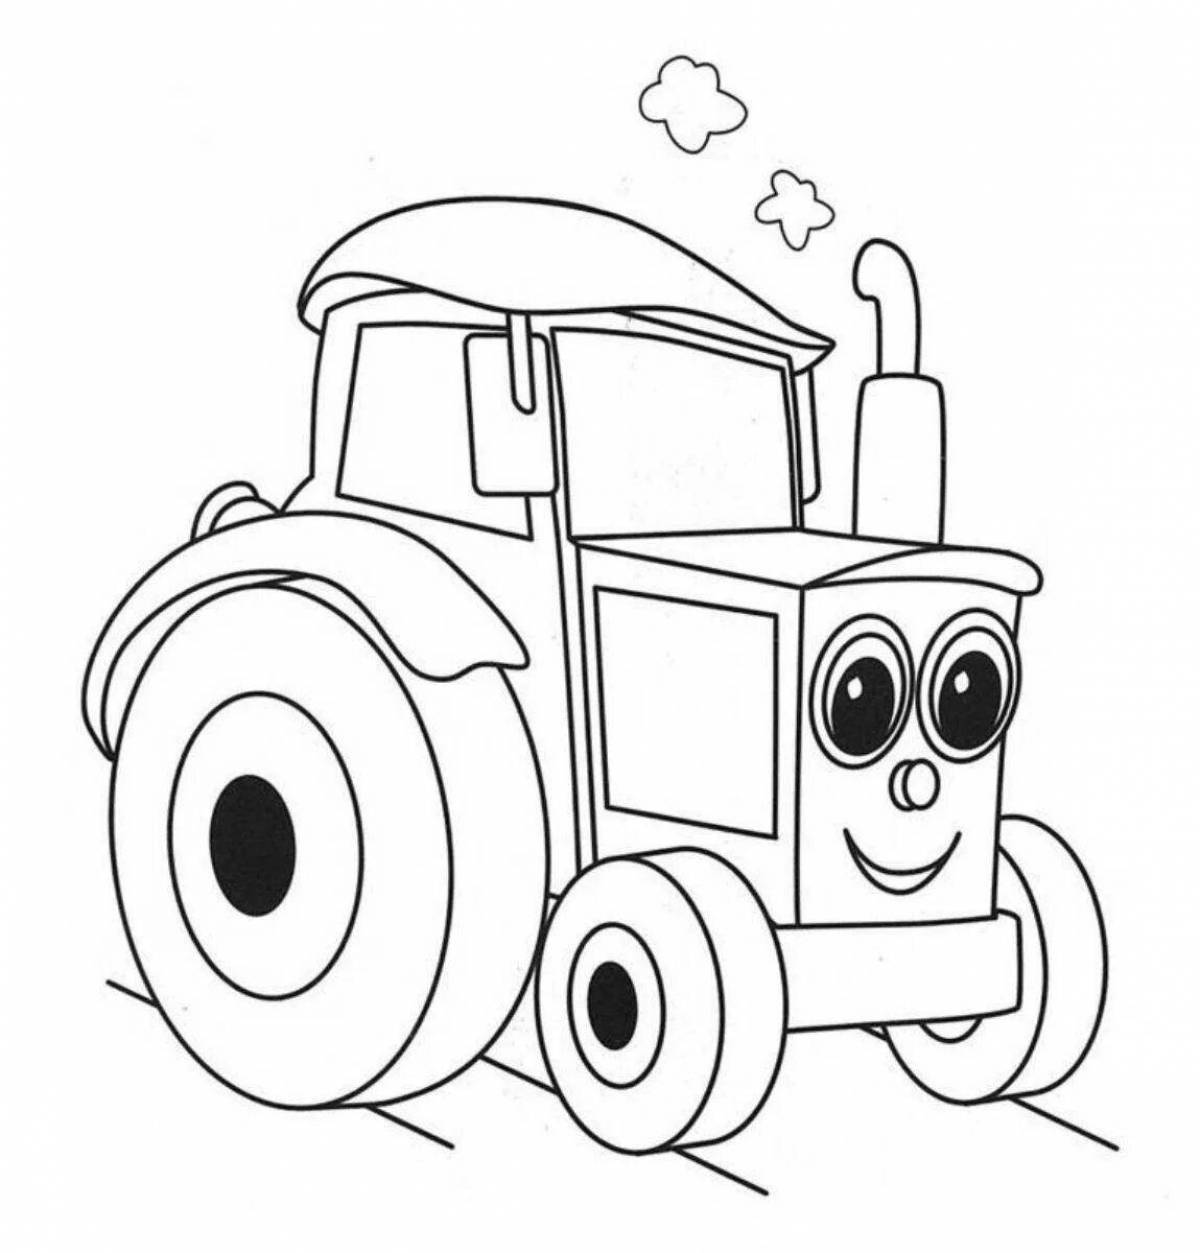 Bright coloring pages with big cars for children 3-4 years old